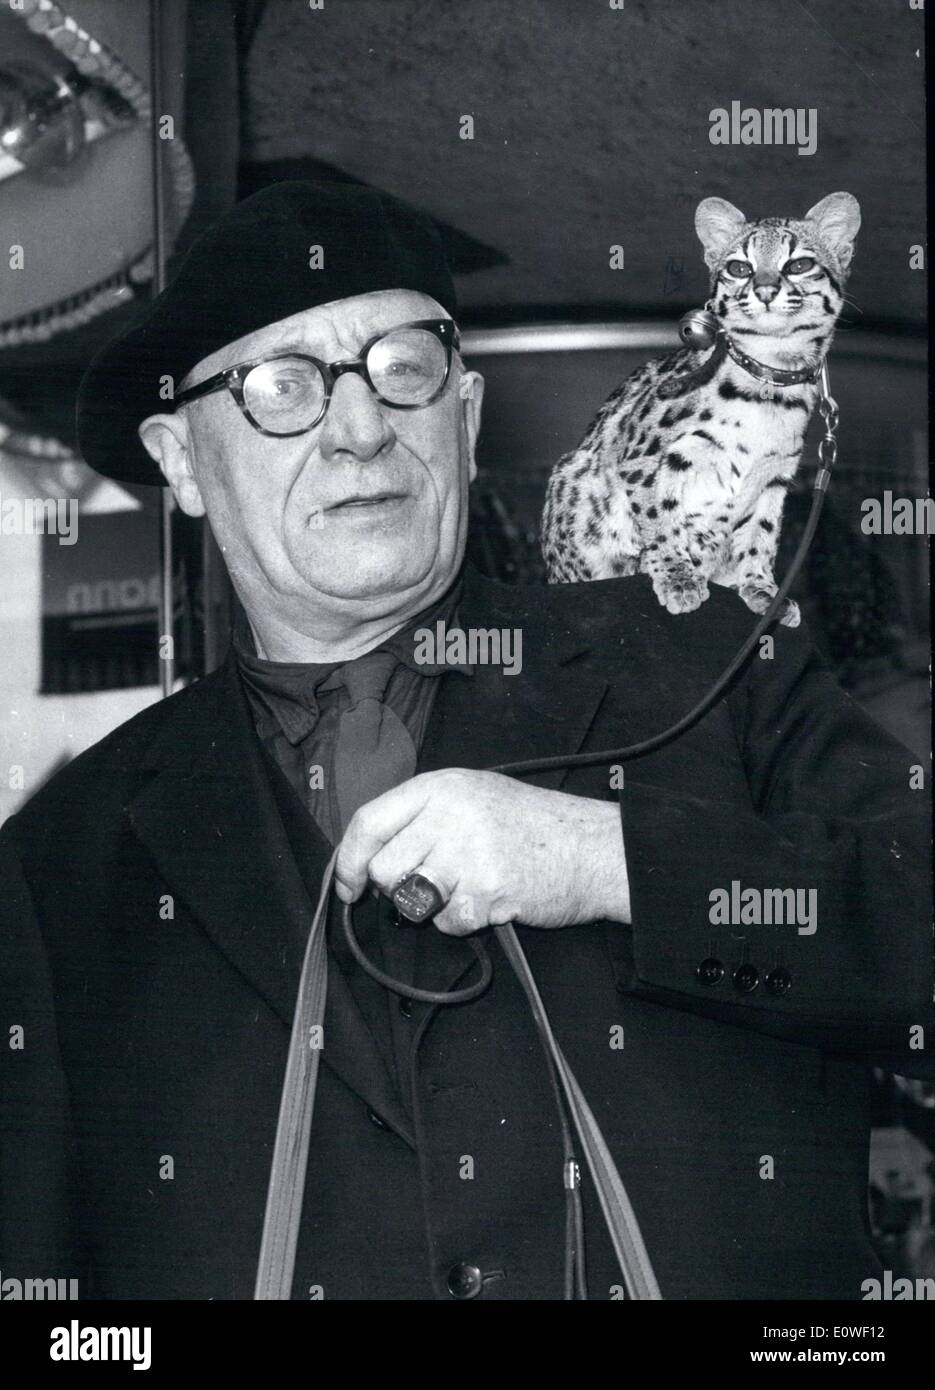 Aug. 08, 1962 - Always taking part in his master's strolls is this midget -tiger cat when the artist from hamburg's reepernahm (Reeperbahn) pleasure - director goes fro a walk. The miniature -tiger the only one of his specie in Germany remains well- behaved on his master's shoulder while the metropolis traffic darts loudly past and the pedestrians on their - way squeeze themselves in a respectful distance from the hard - looking stranger. Stock Photo